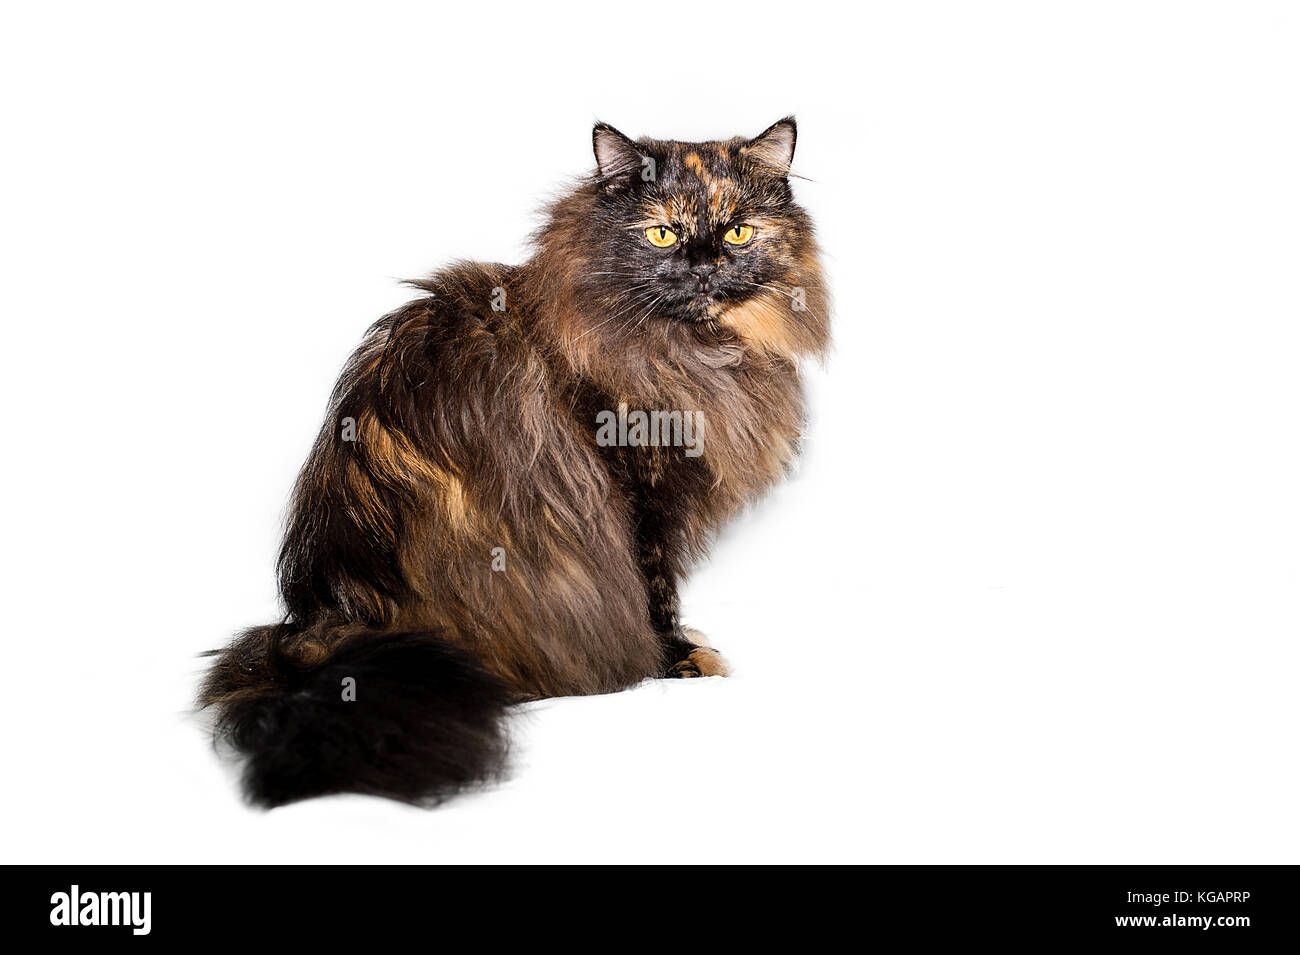 Fluffy black-haired cat sitting and looking sadly isolated on white background. Stock Photo